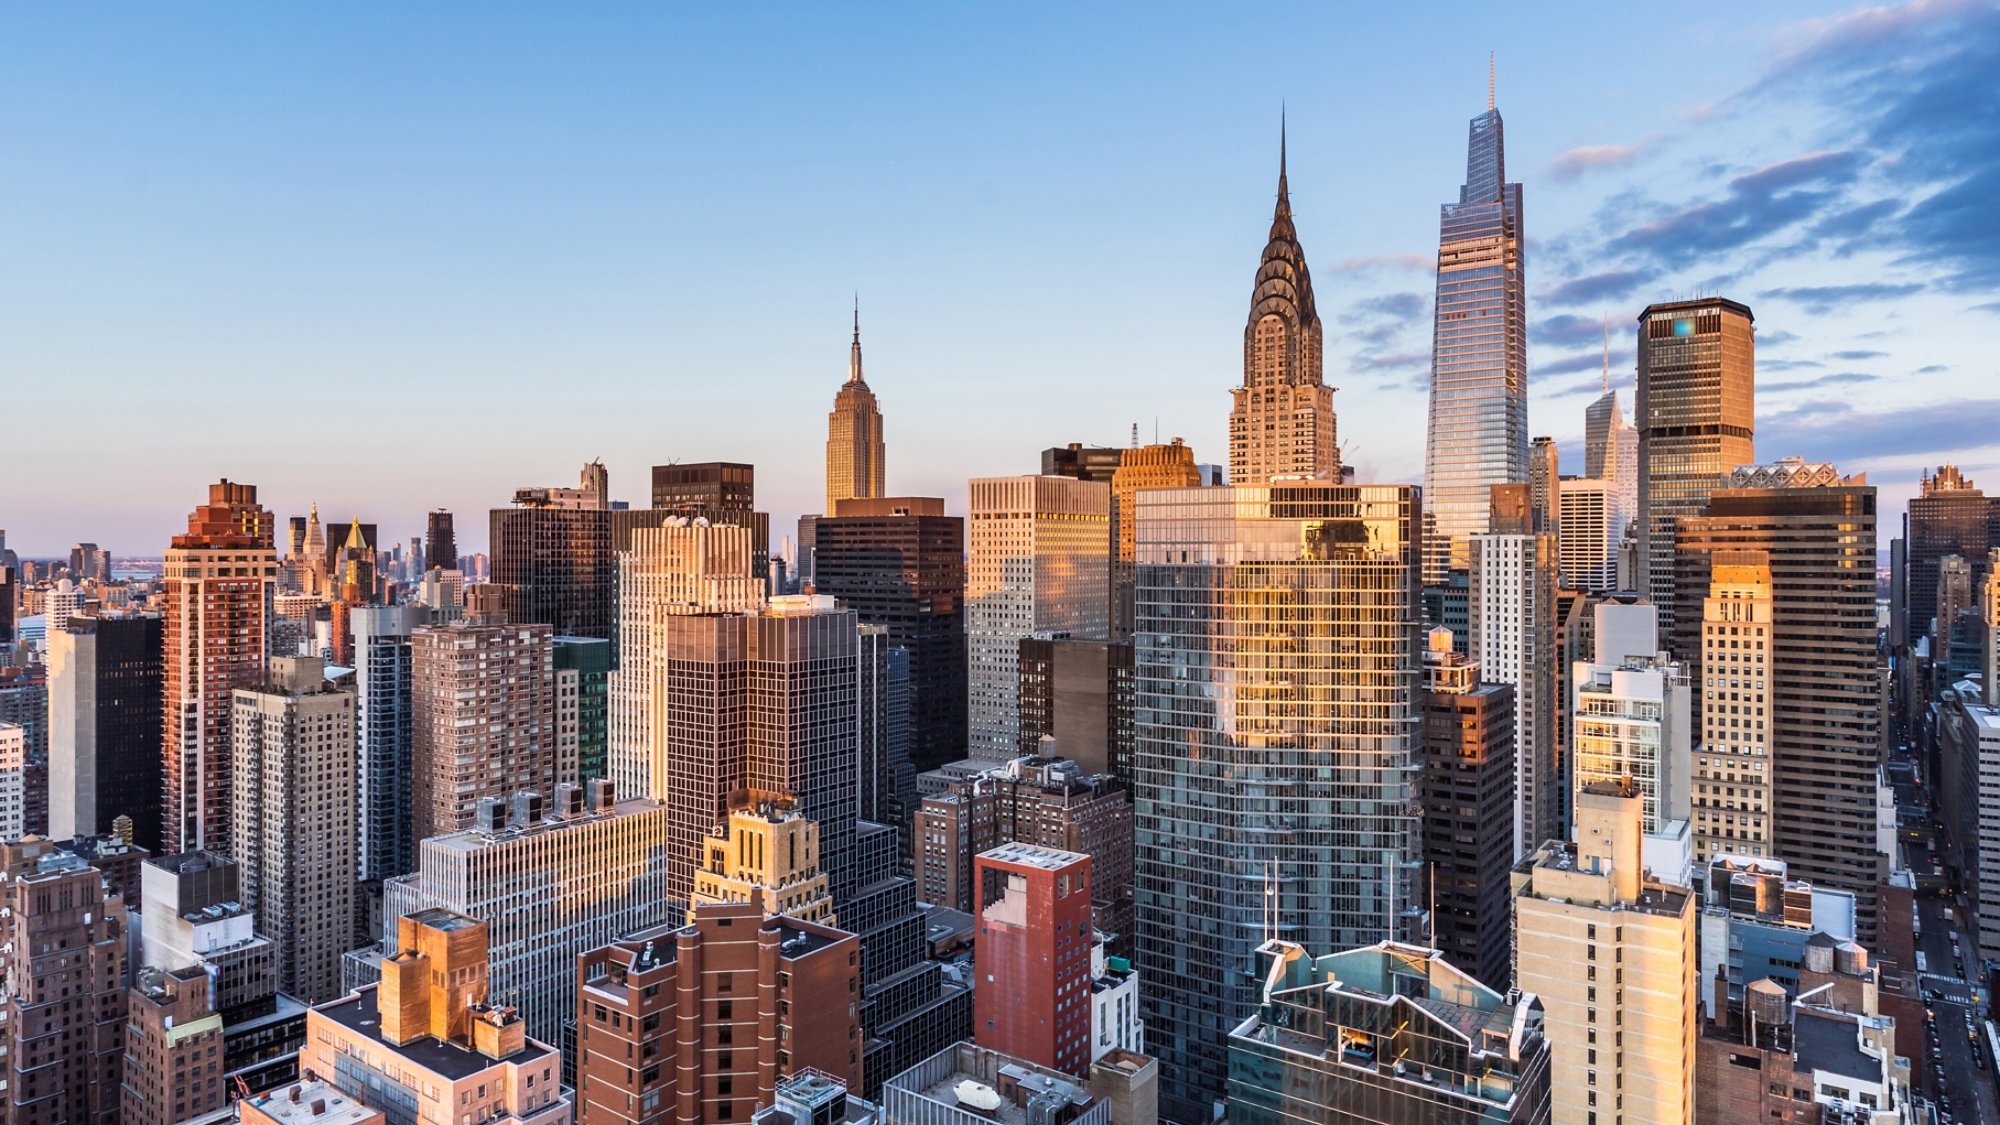 This high angle sunrise view from UN Plaza on the east side of Manhattan looks southwest over the Kips Bay neighborhood toward the Empire State Building, the Chrysler Building, and One Vanderbilt with Lower Manhattan and One World Trade Center in the distance.